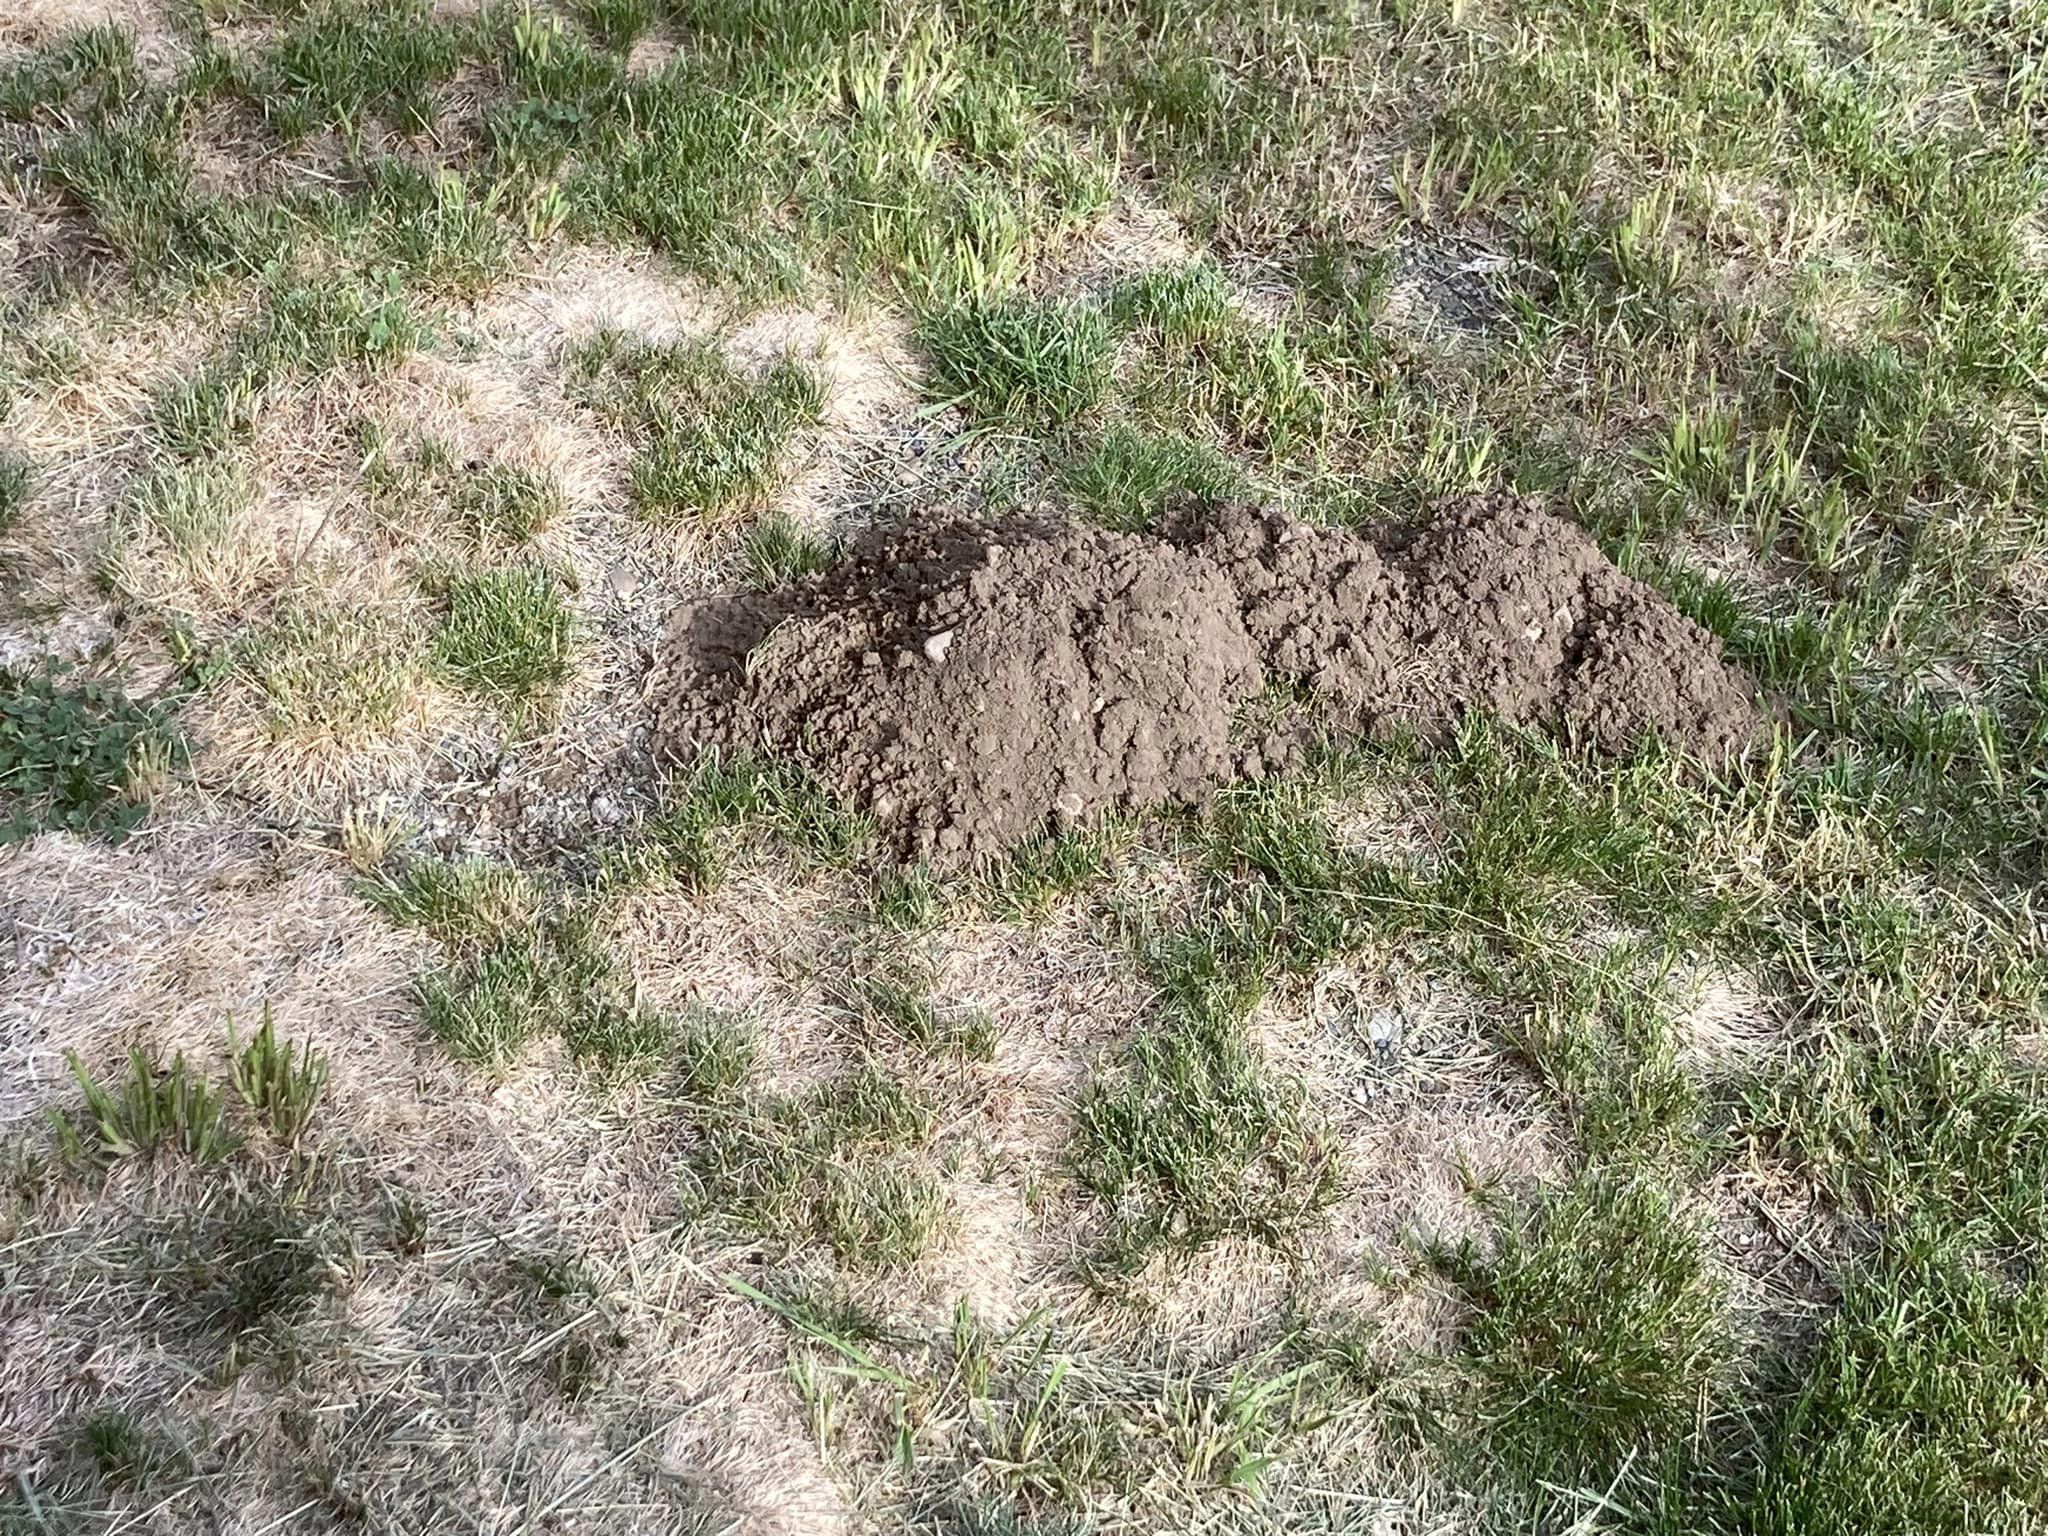 gopher mounds